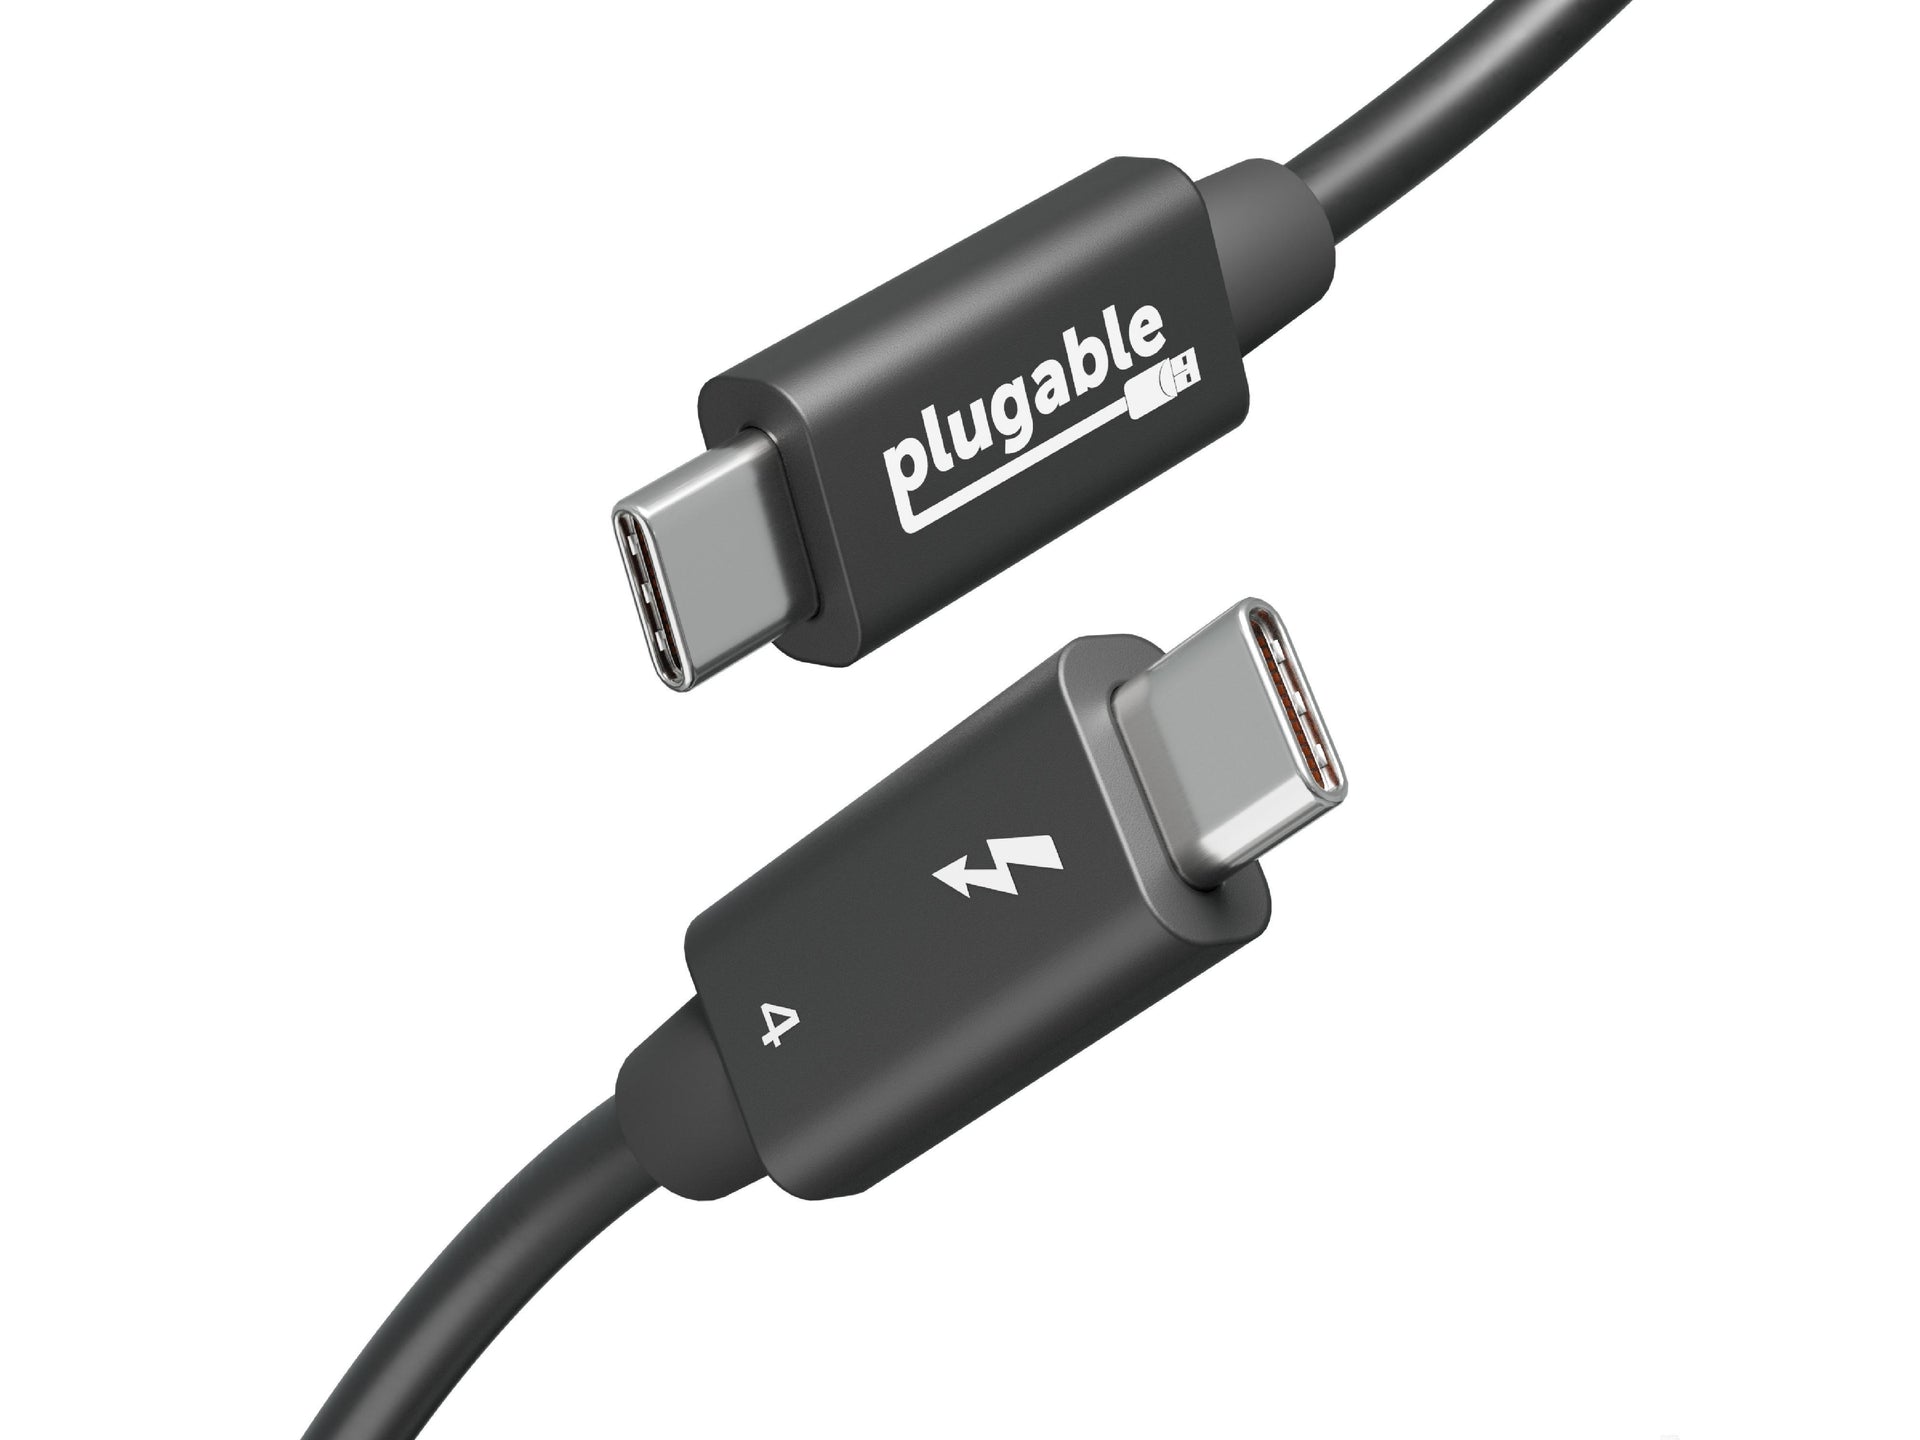  [Intel Certified] Cable Matters Thunderbolt Cable (Thunderbolt 2  Cable) in Black 6.6 Feet : Electronics